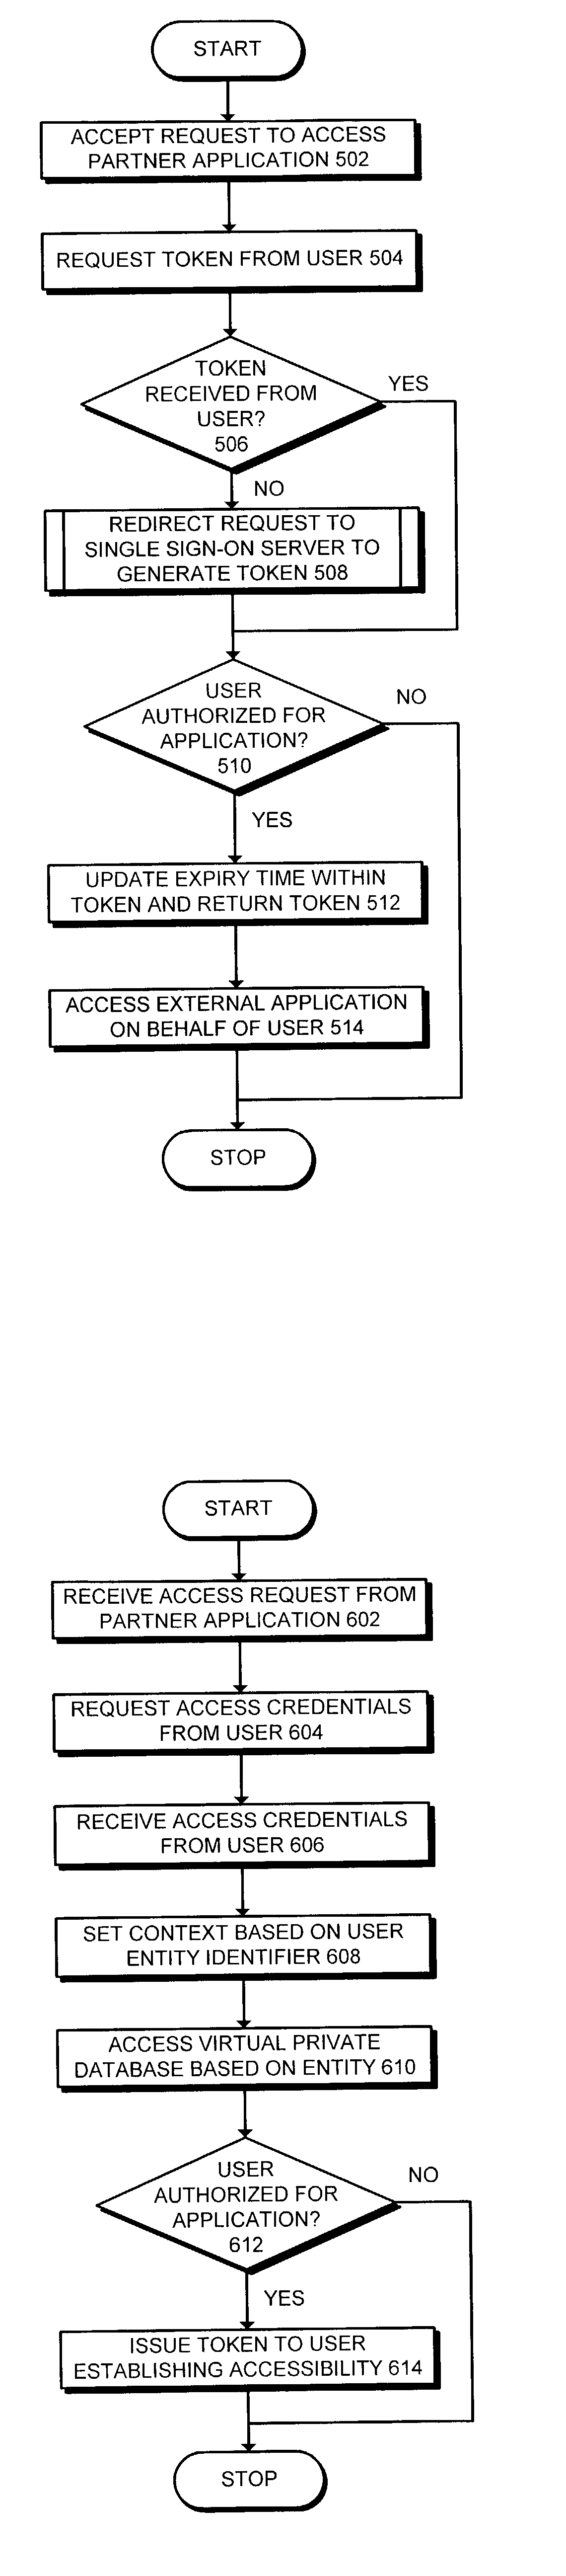 Method and apparatus to facilitate single sign-on services in a hosting environment